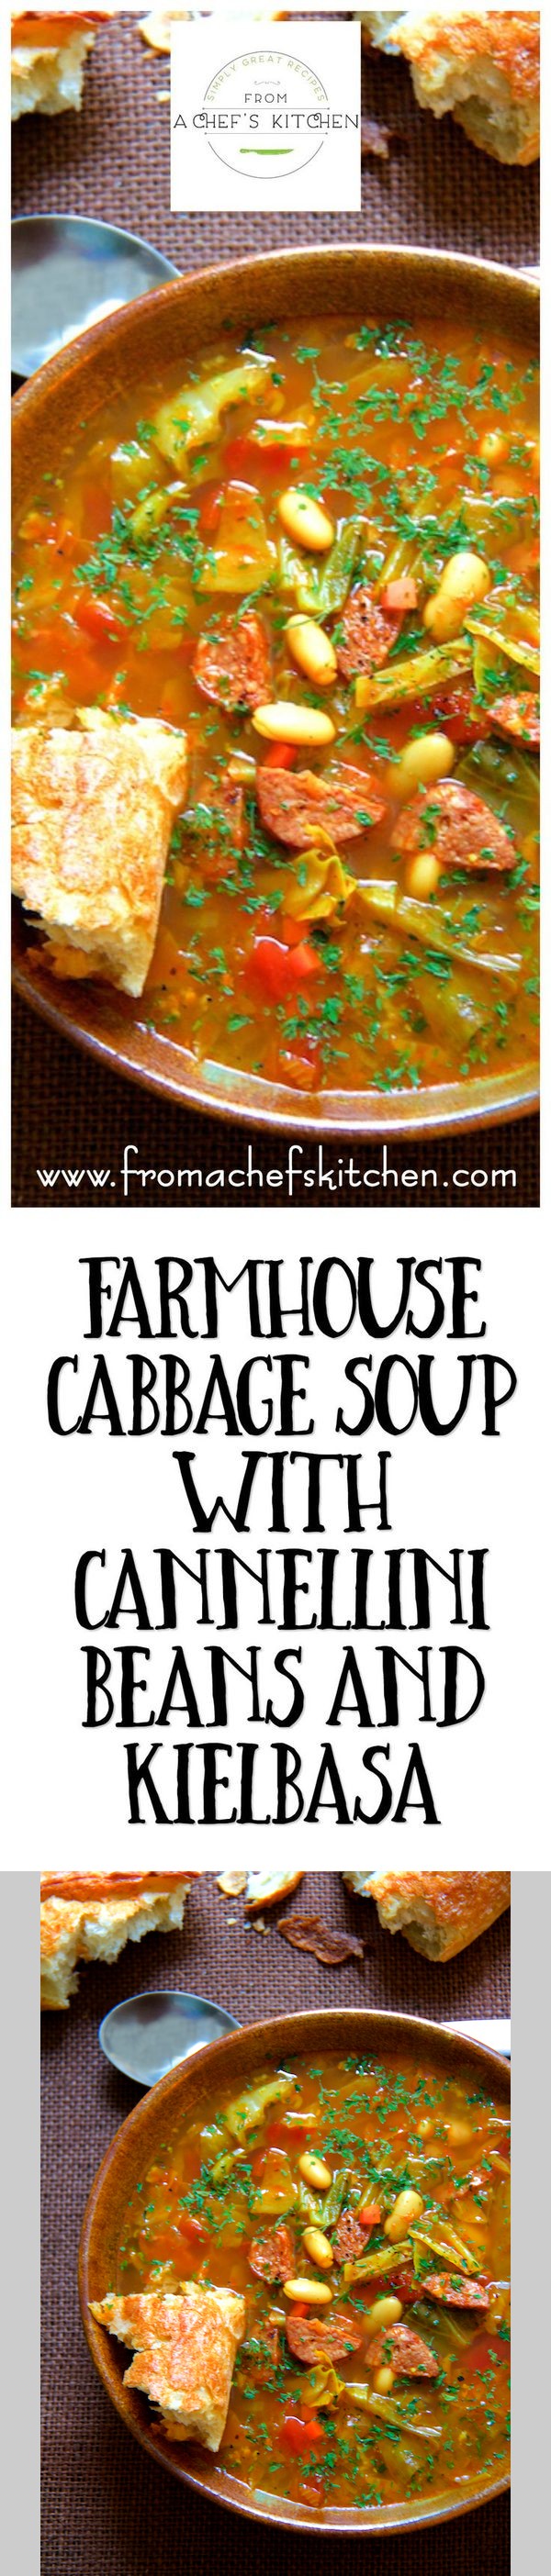 Farmhouse Cabbage Soup with Cannellini Beans and Kielbasa